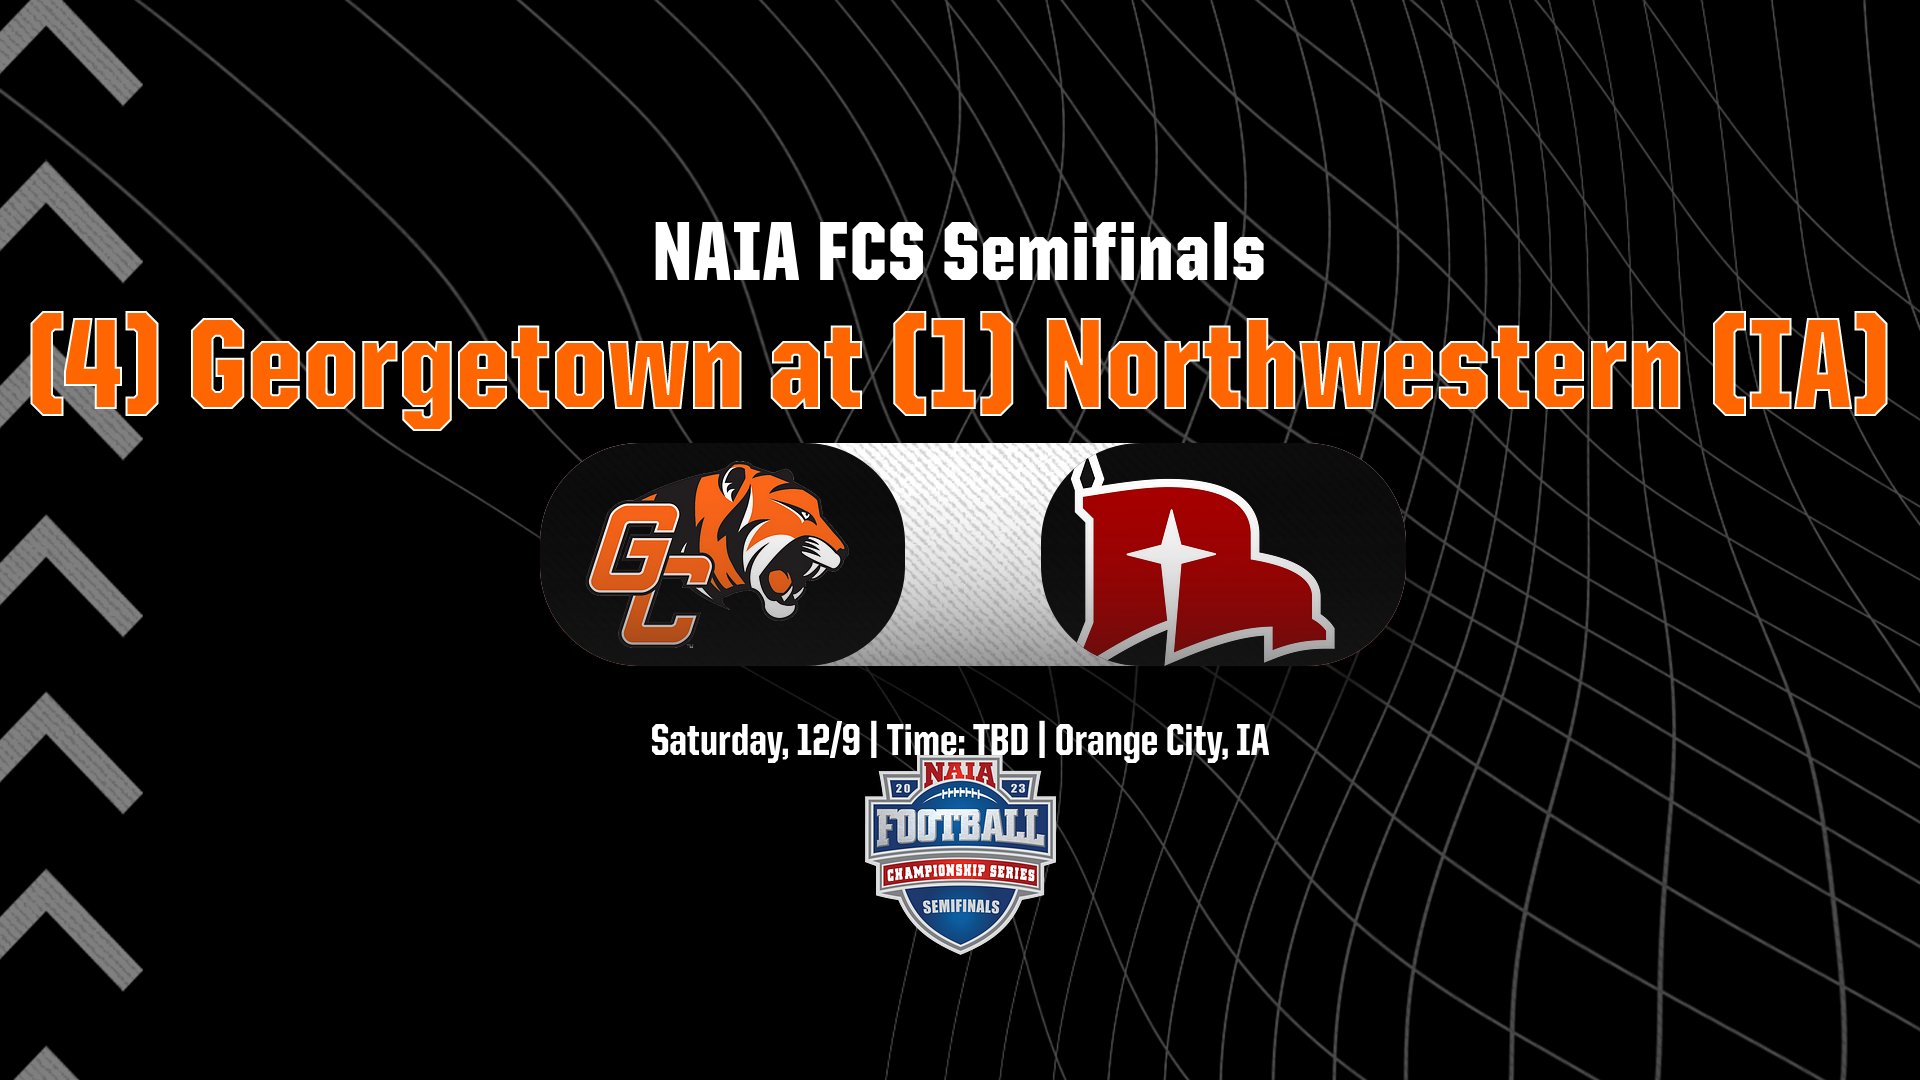 Georgetown faces Northwestern in NAIA FCS Semifinals